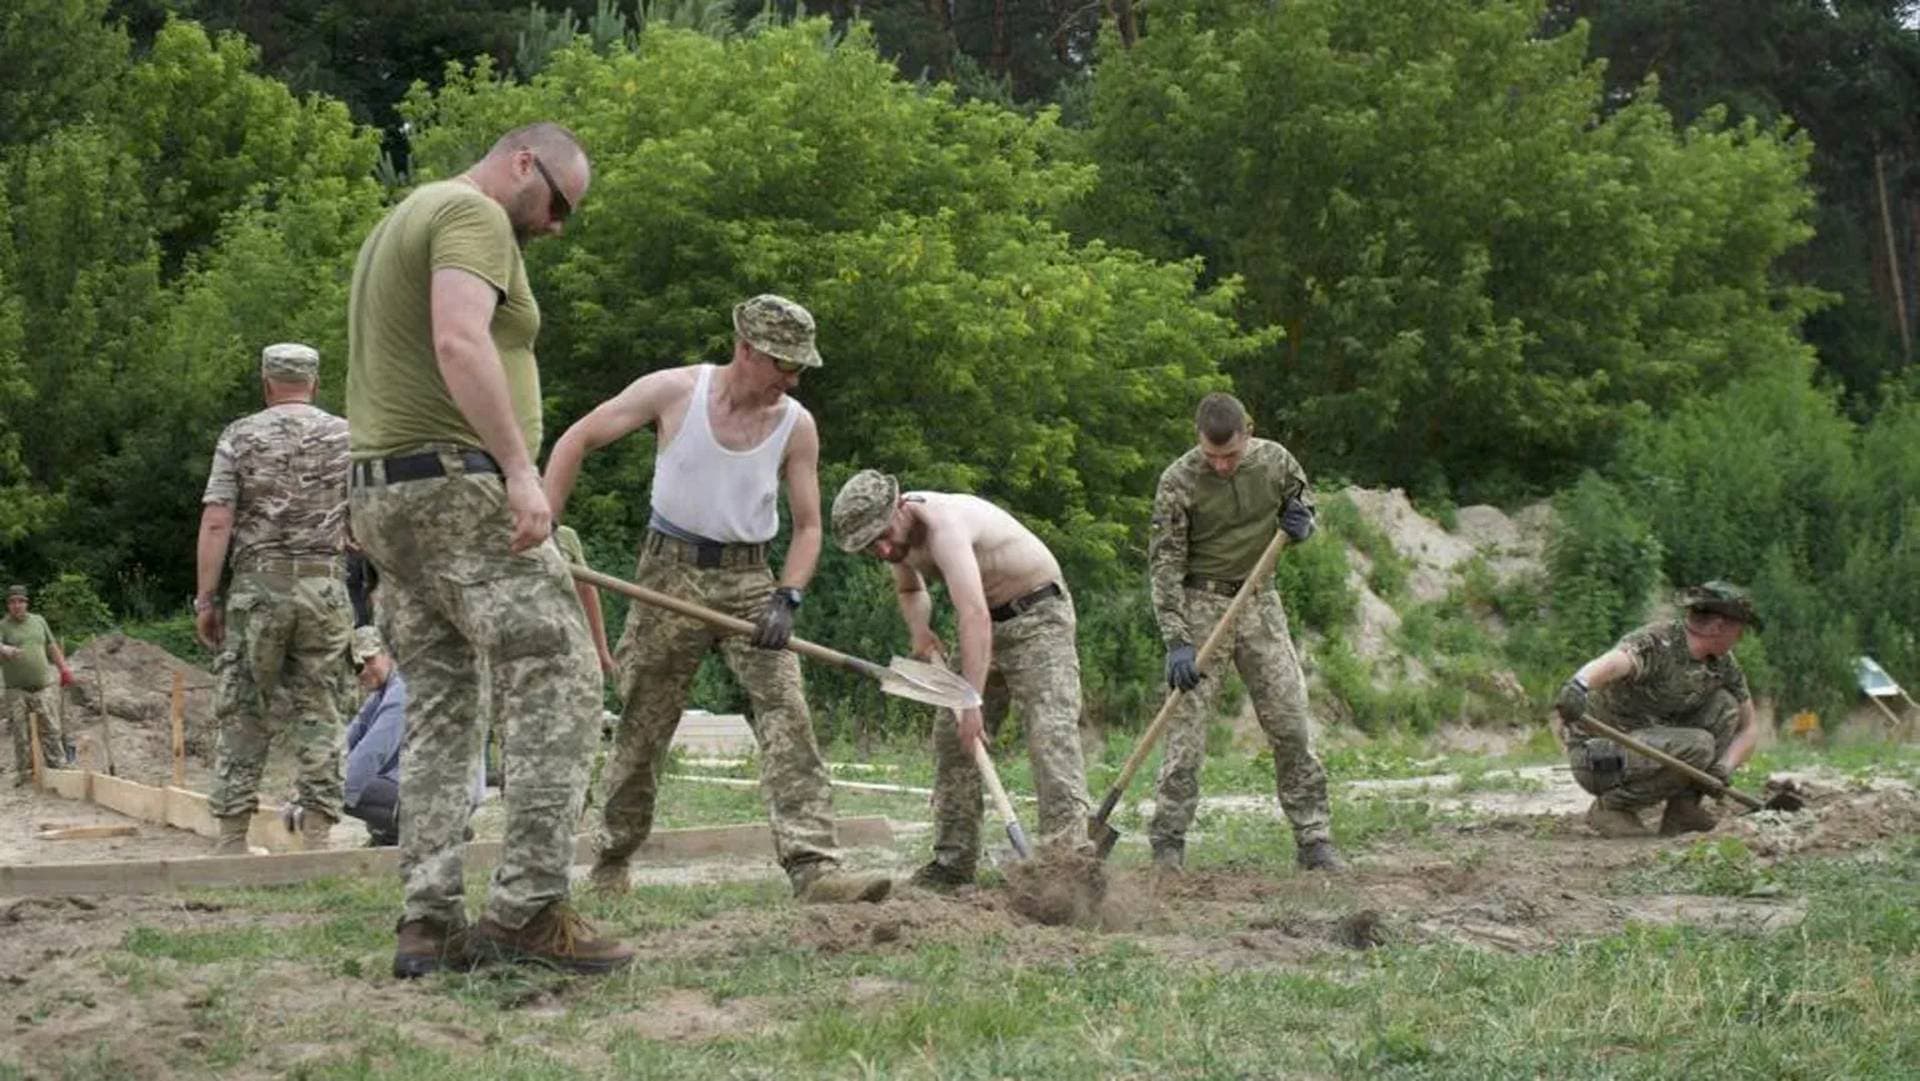 The group of conscripts at this Kyiv training camp